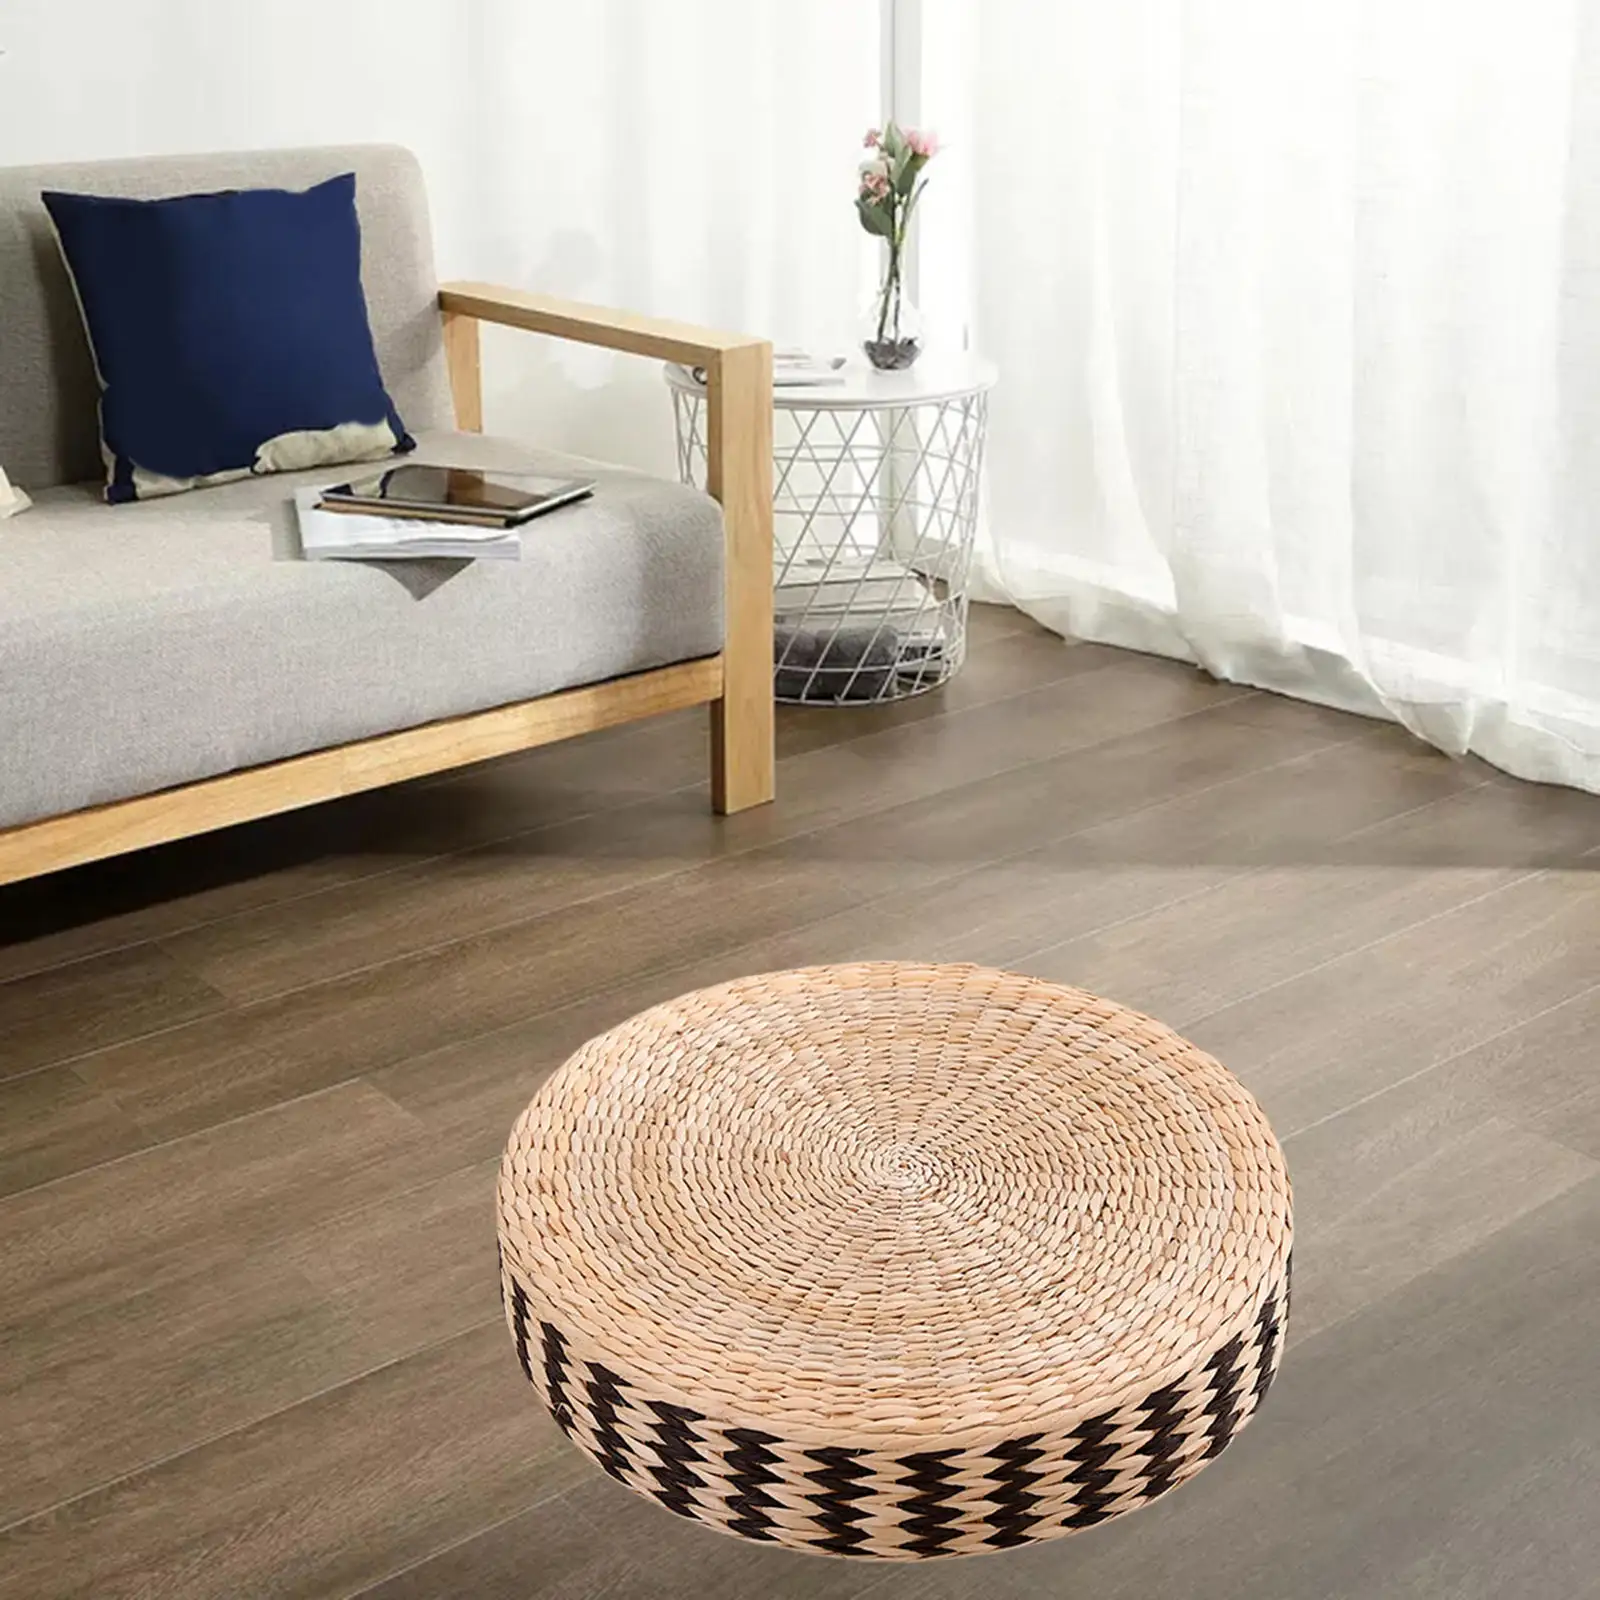 Round Japanese Style Thicken Floor Cushion Woven Straw Handcrafted Rattan Yoga Cushion Comfortable Living Room Decor